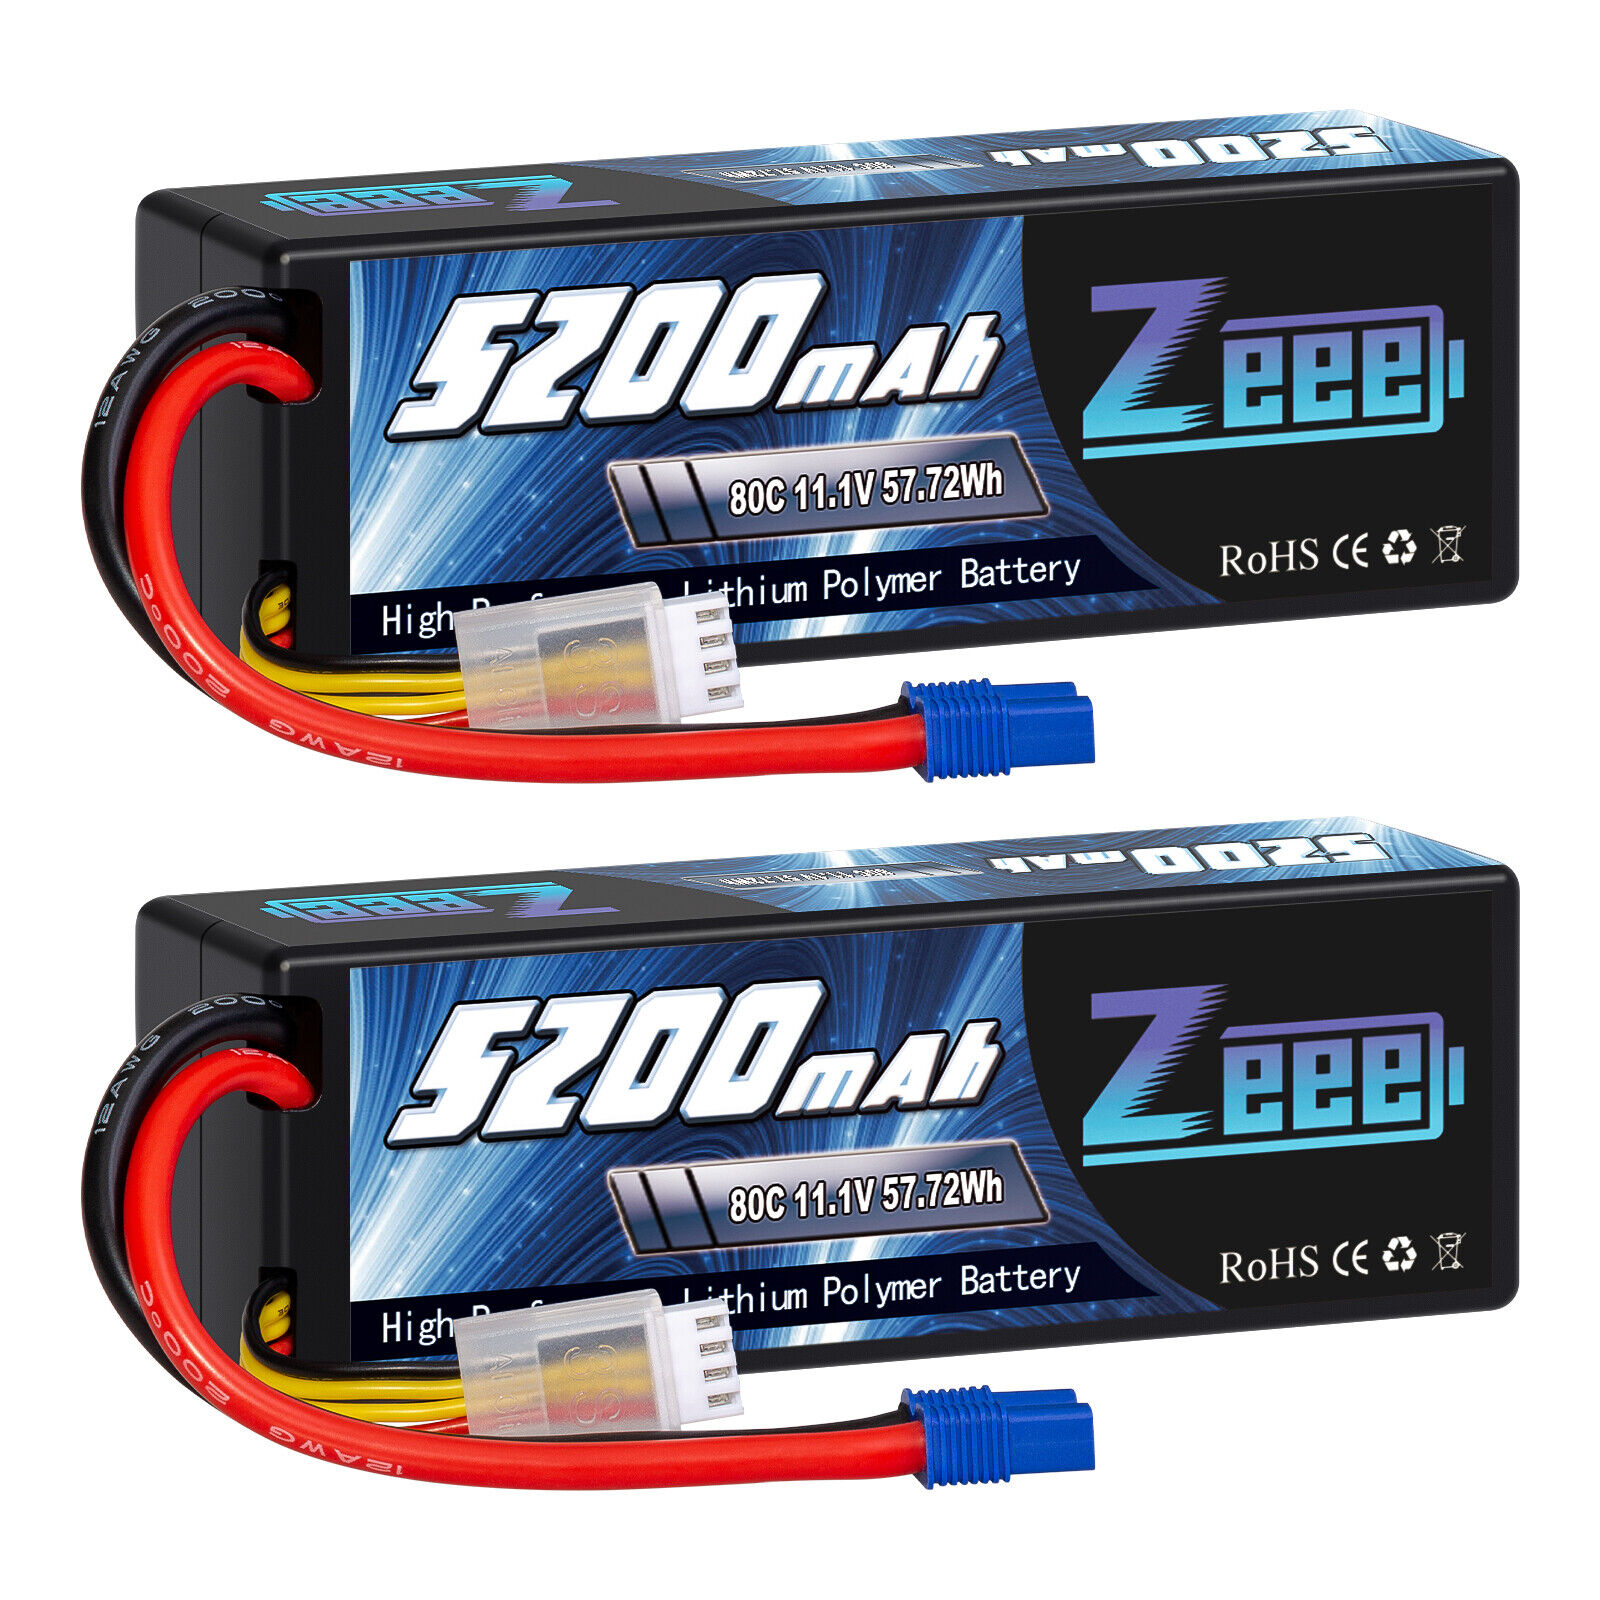 2x Zeee 11.1V 80C 5200mAh EC3 3S LiPo Battery for RC Car Truck Helicopter Buggy ZEEE Does Not Apply